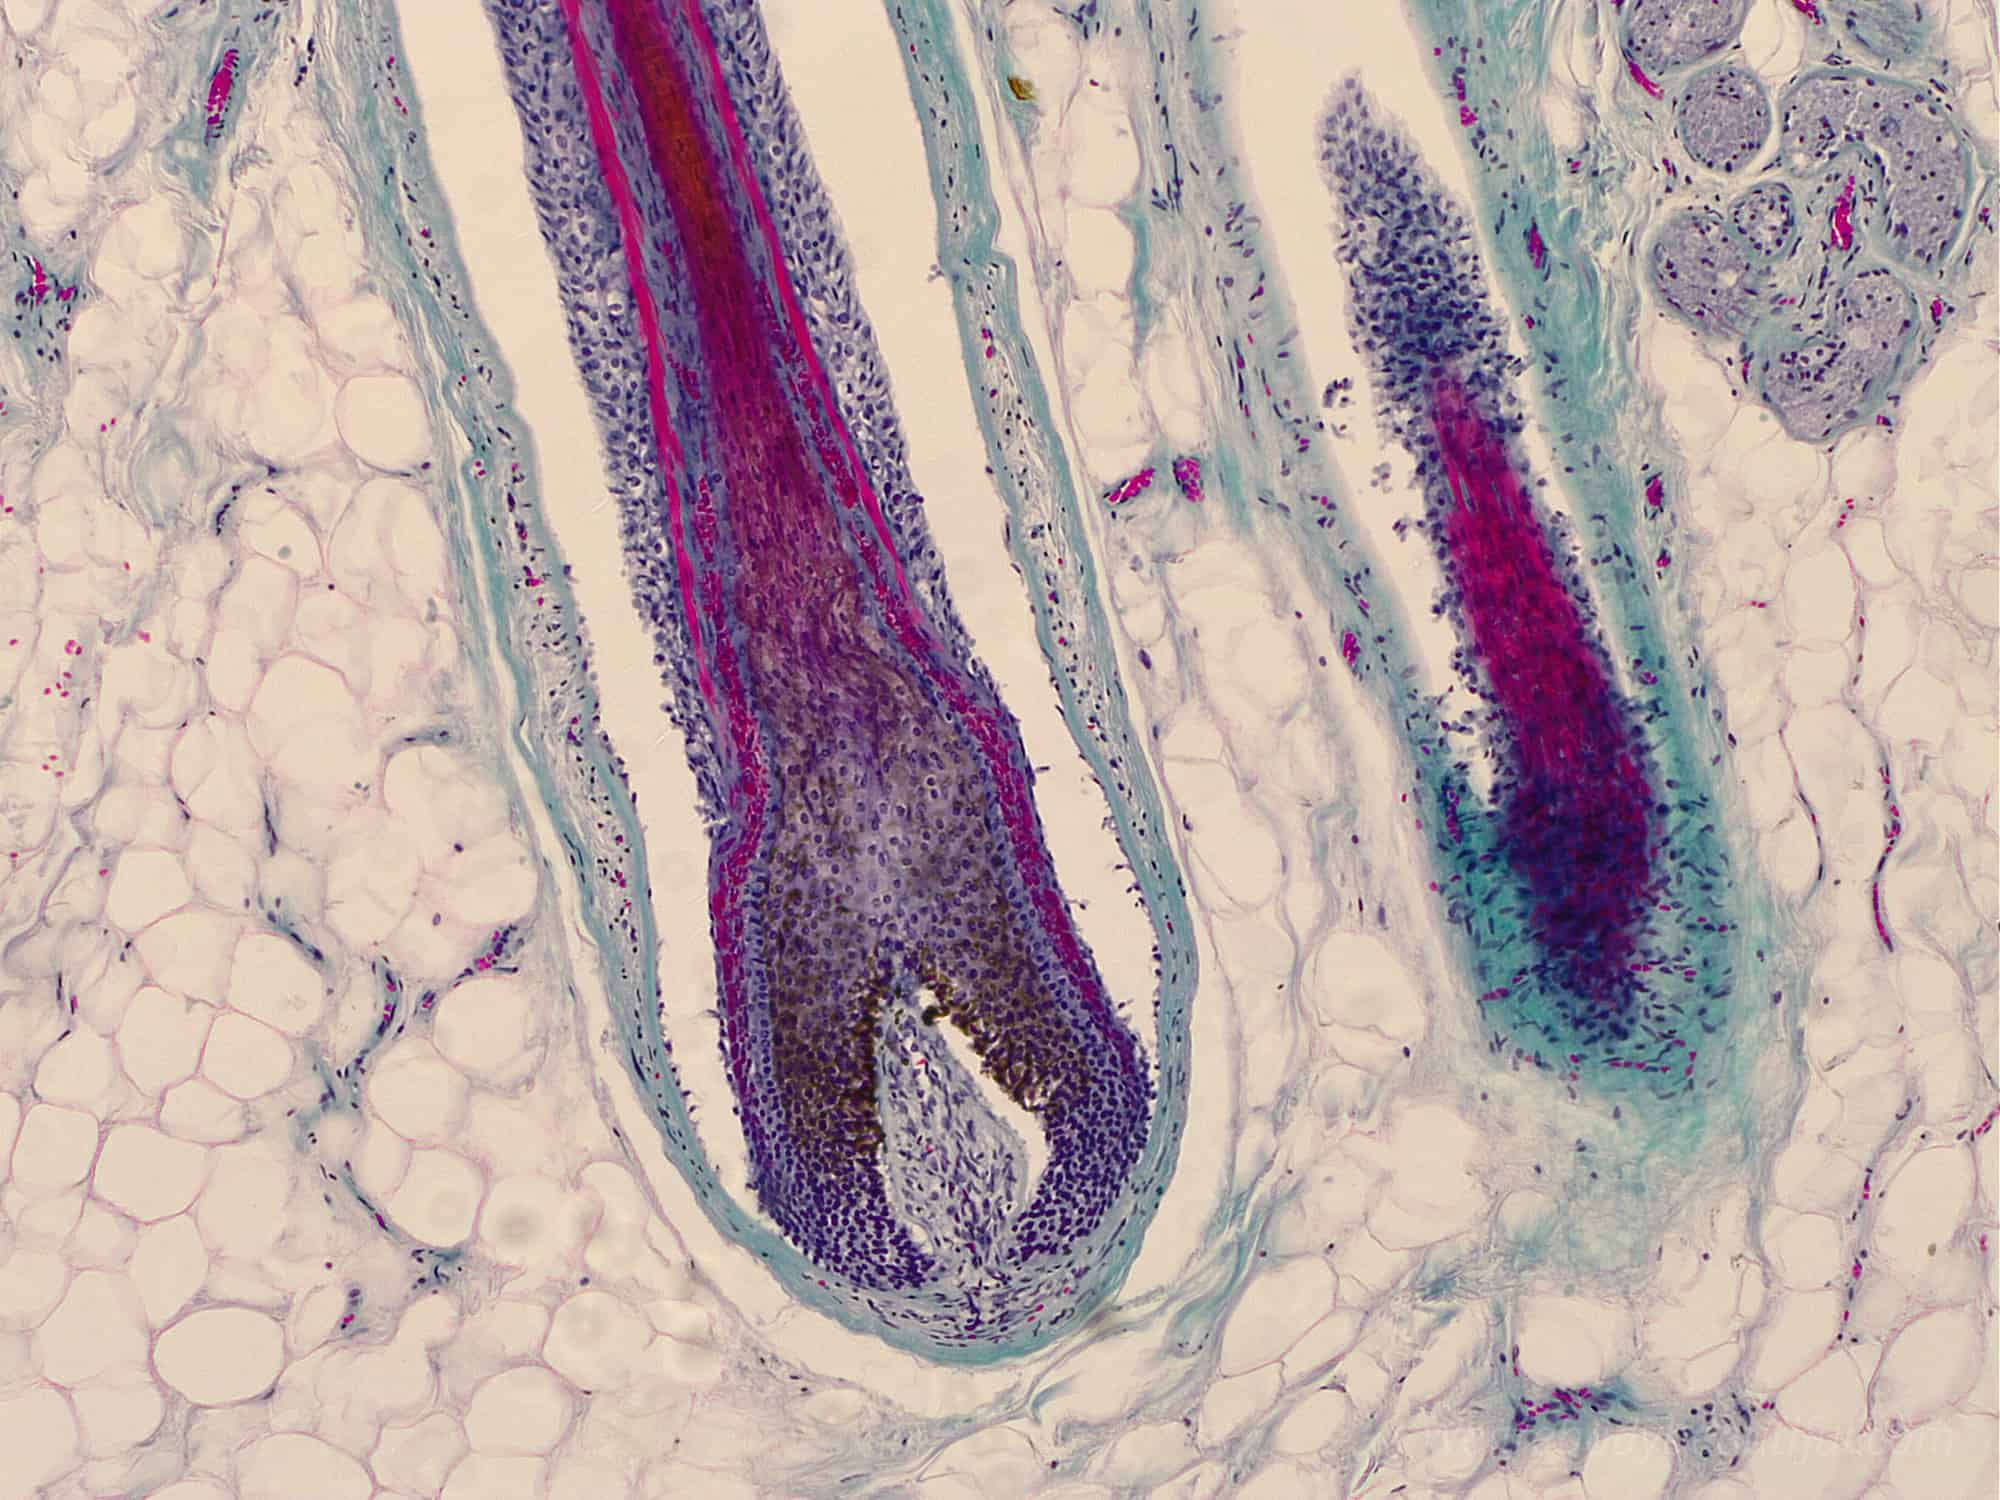 A close-up photo of a growing hair follicle in skin tissue. Learn what laser and IPL hair removal does to your follicles here.